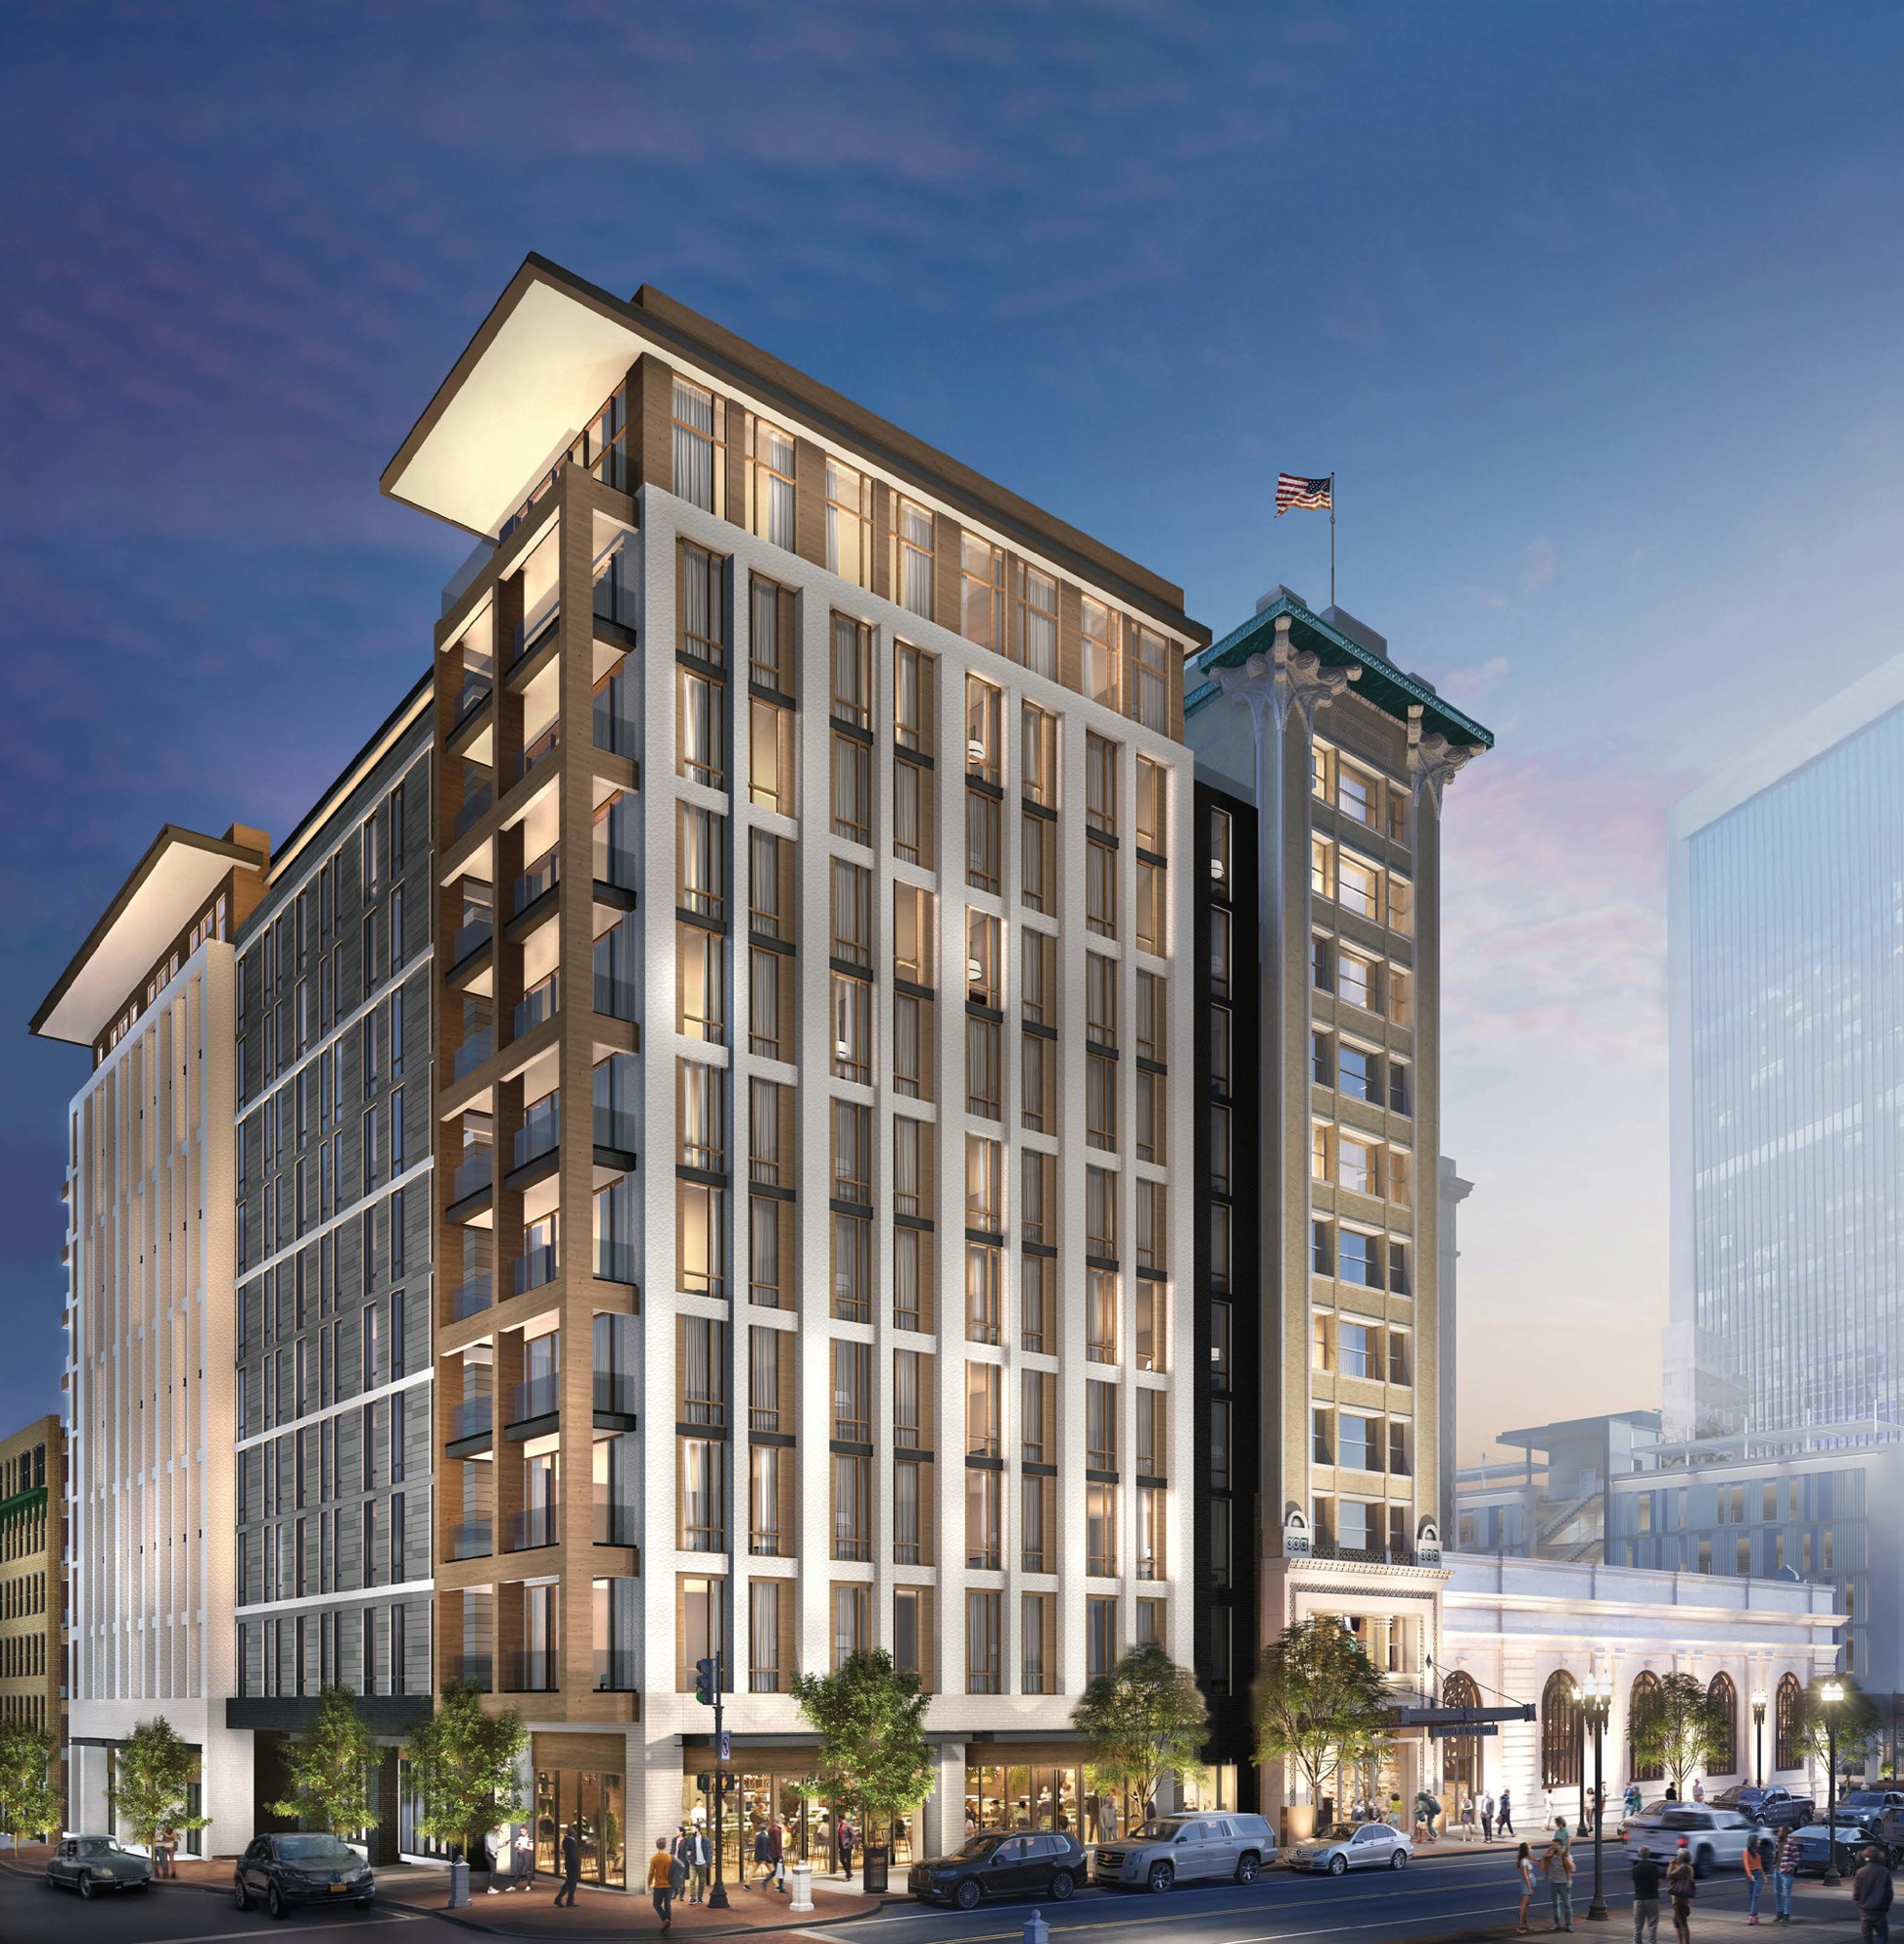 A rendering of the redeveloped Laura Street Trio as viewed from Adams and Laura streets. Apartments and retail will be built north of the Florida Life Insurance Building. Previously, the project’s hotel was planned there.